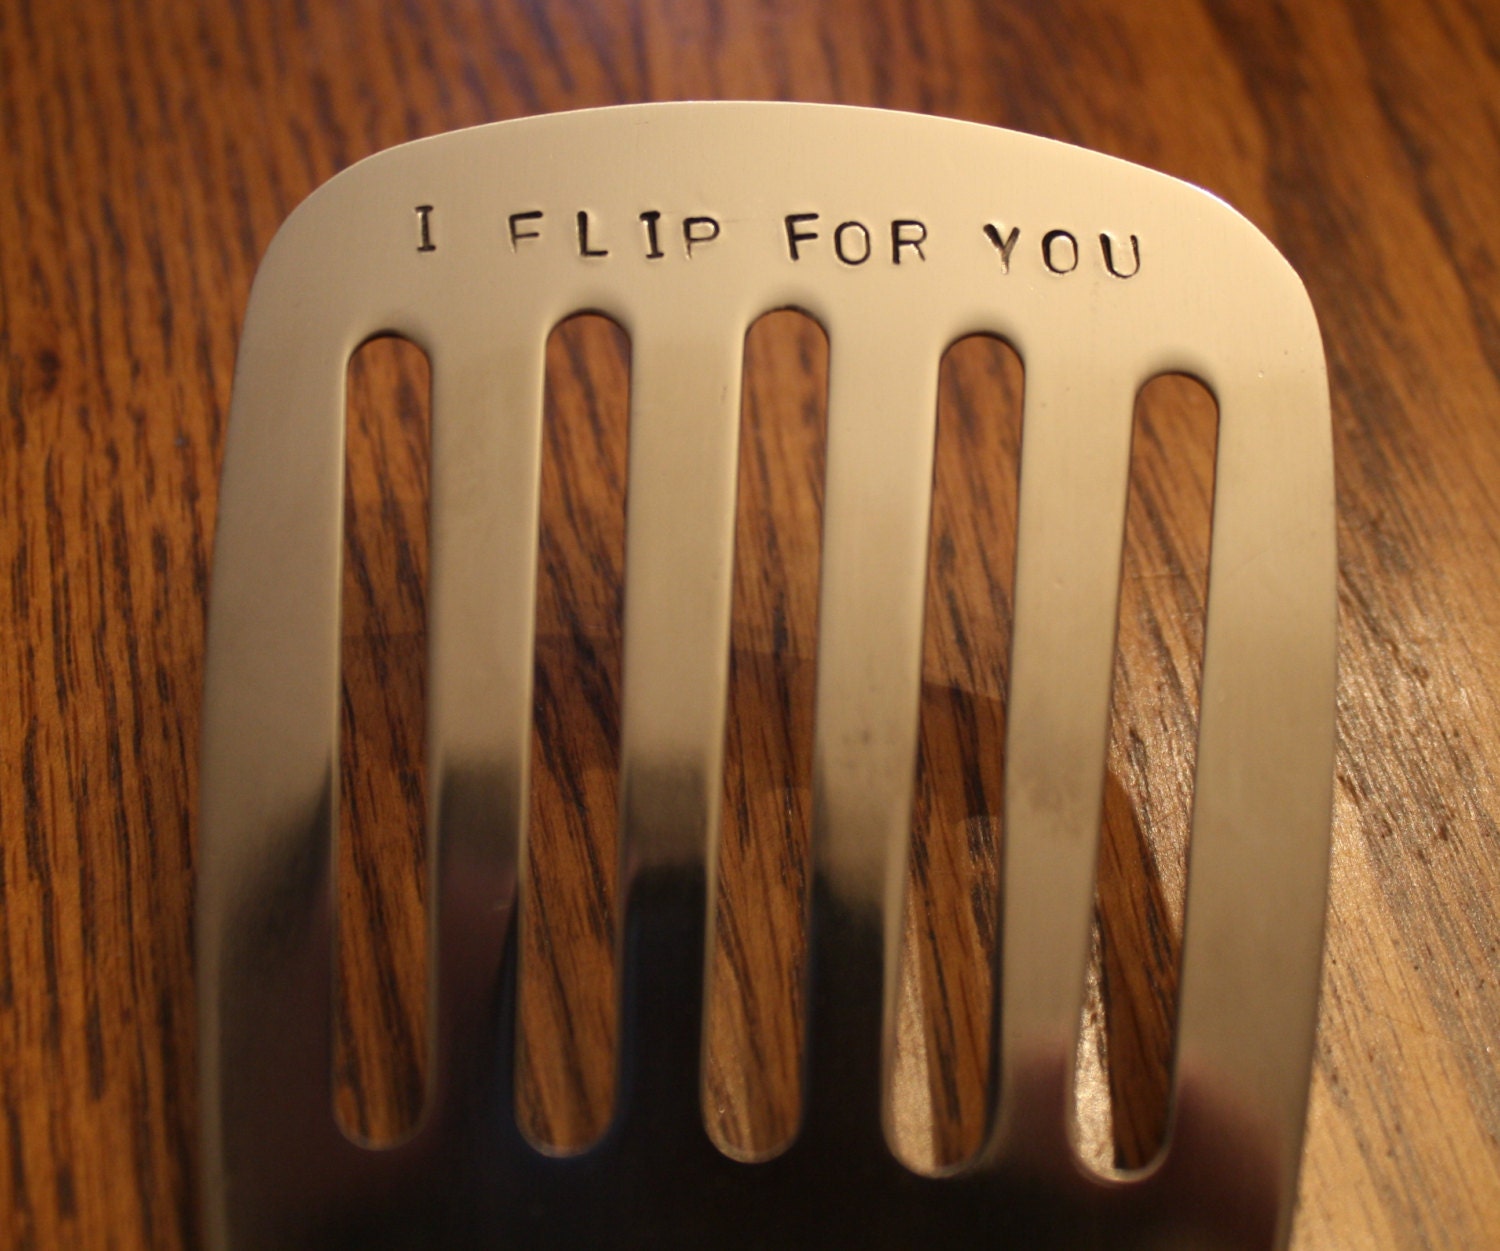 I FLIP for YOU, can personalize,hand stamped grilling spatula.  Gift for dad, grandpa. man gift, valentines day, camping, BBQ